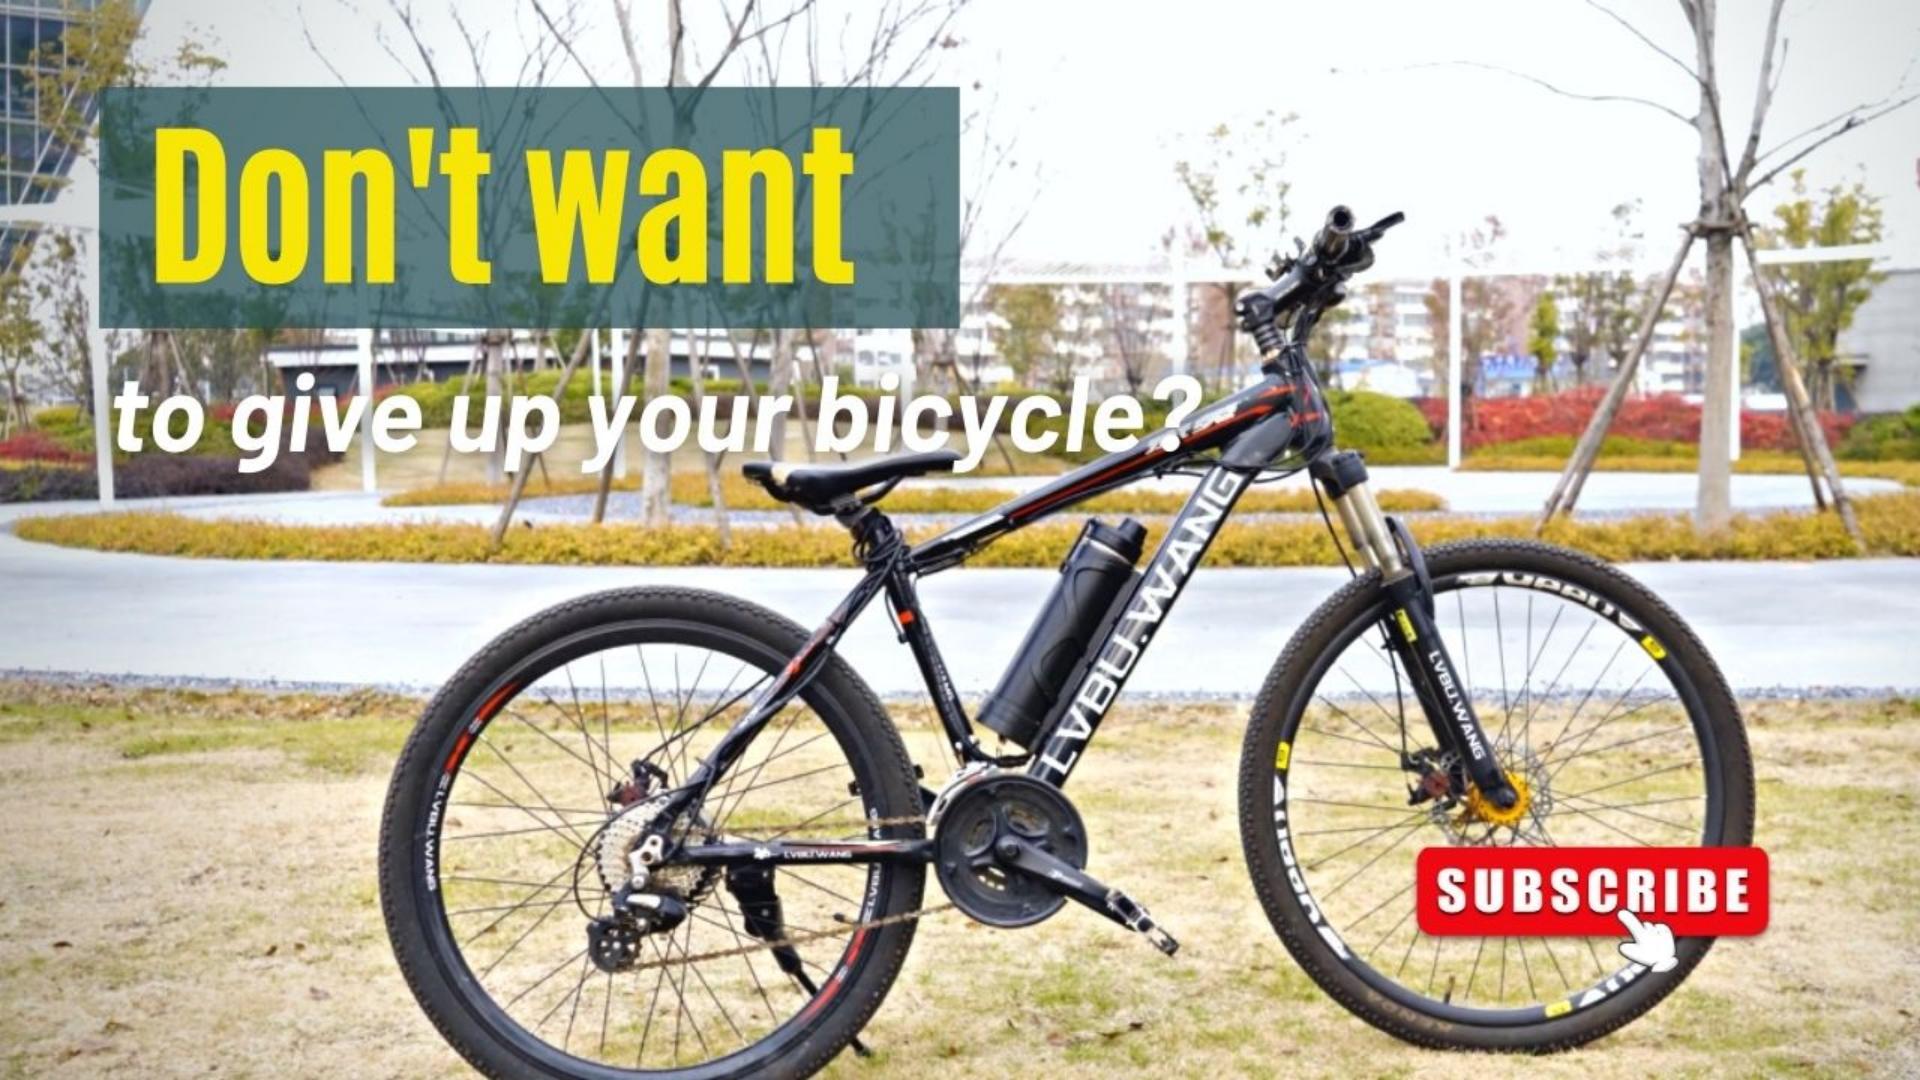 Don't want to give up your bicycle?